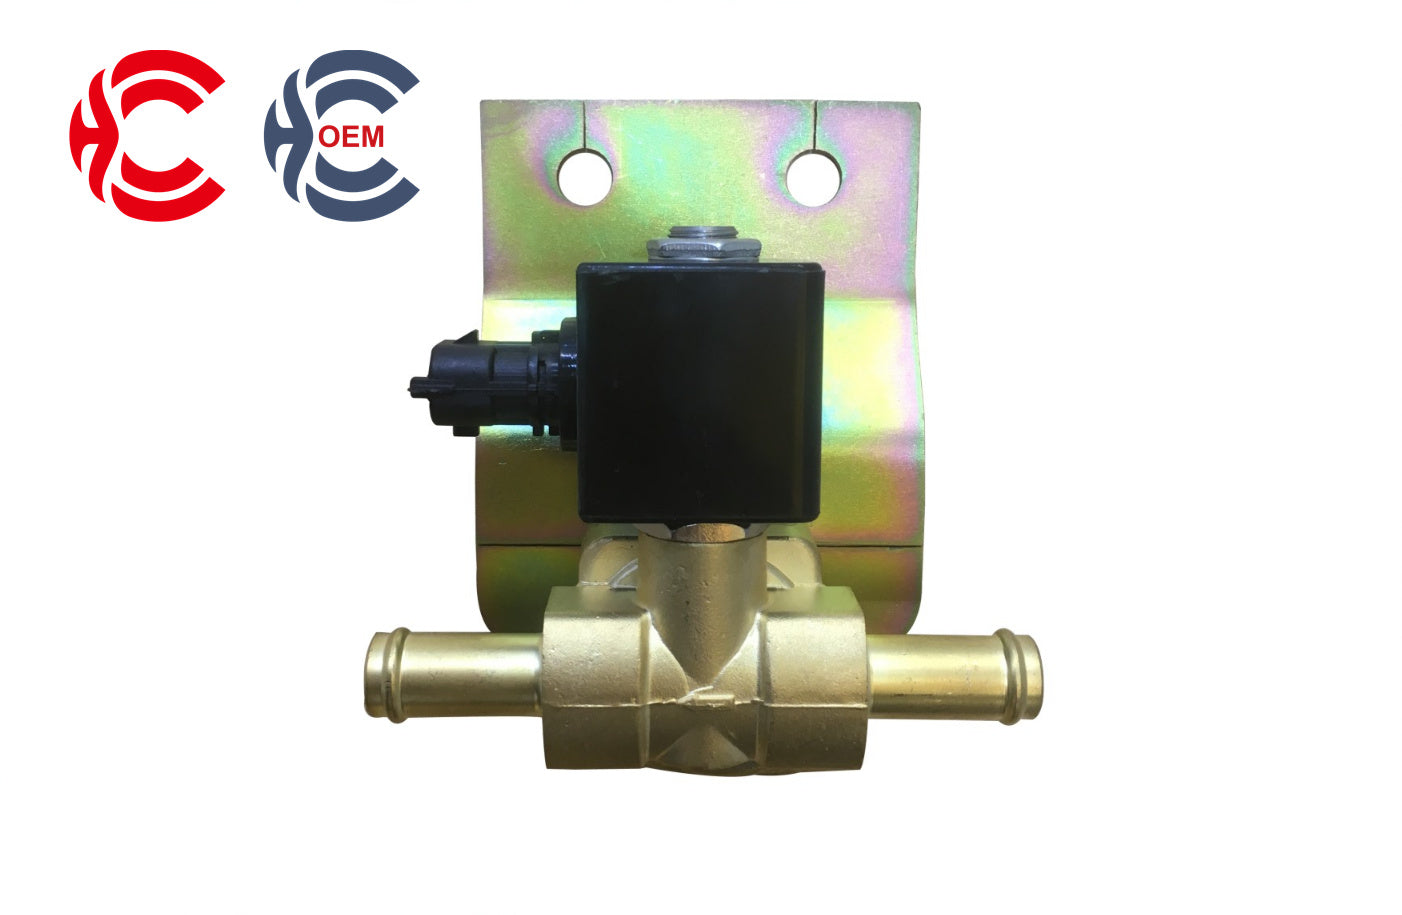 OEM: HUALING C Bracket Adblue/Urea Heating Solenoid ValveMaterial: ABS MetalColor: blackOrigin: Made in ChinaWeight: 200gPacking List: 1* Urea Heating Solenoid Valve More ServiceWe can provide OEM Manufacturing serviceWe can Be your one-step solution for Auto PartsWe can provide technical scheme for you Feel Free to Contact Us, We will get back to you as soon as possible.